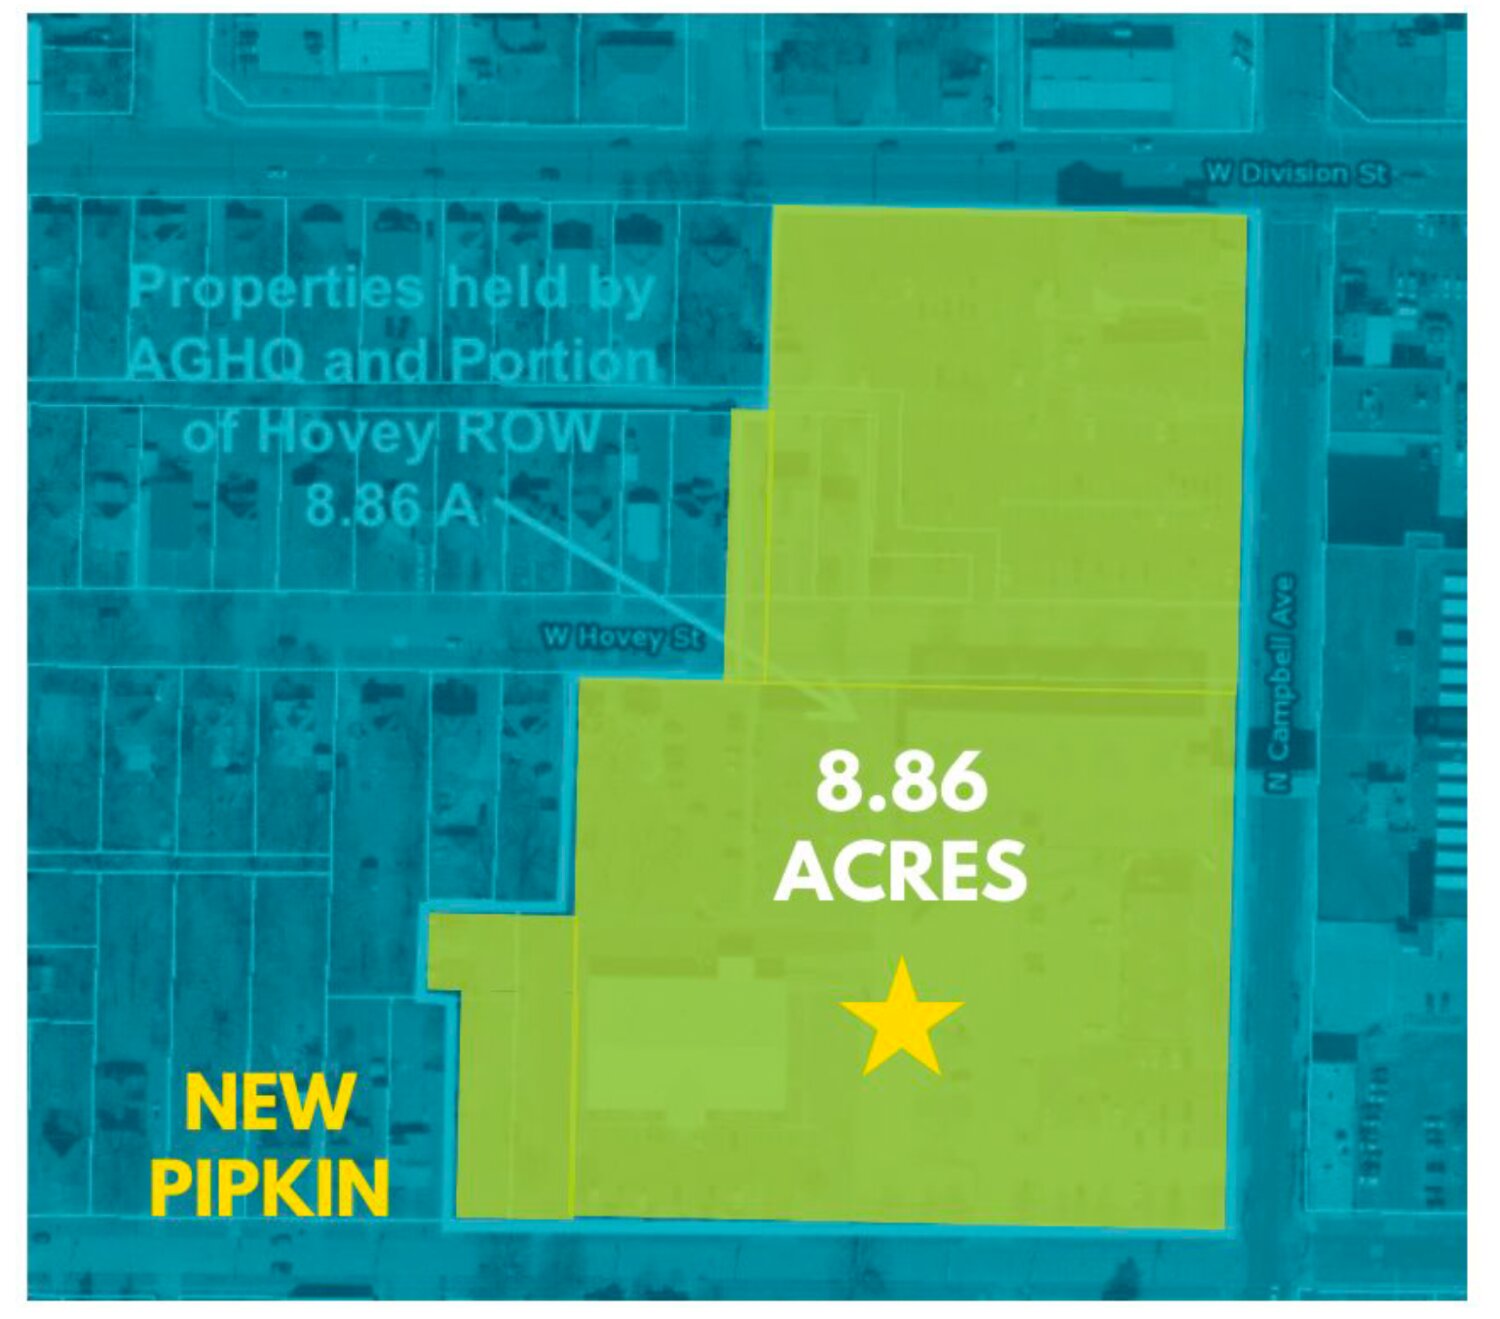 The property under contract for the new Pipkin Middle School is bounded to the east by North Campbell Avenue, with West Division Street on the north and West Lynn Street on the south.